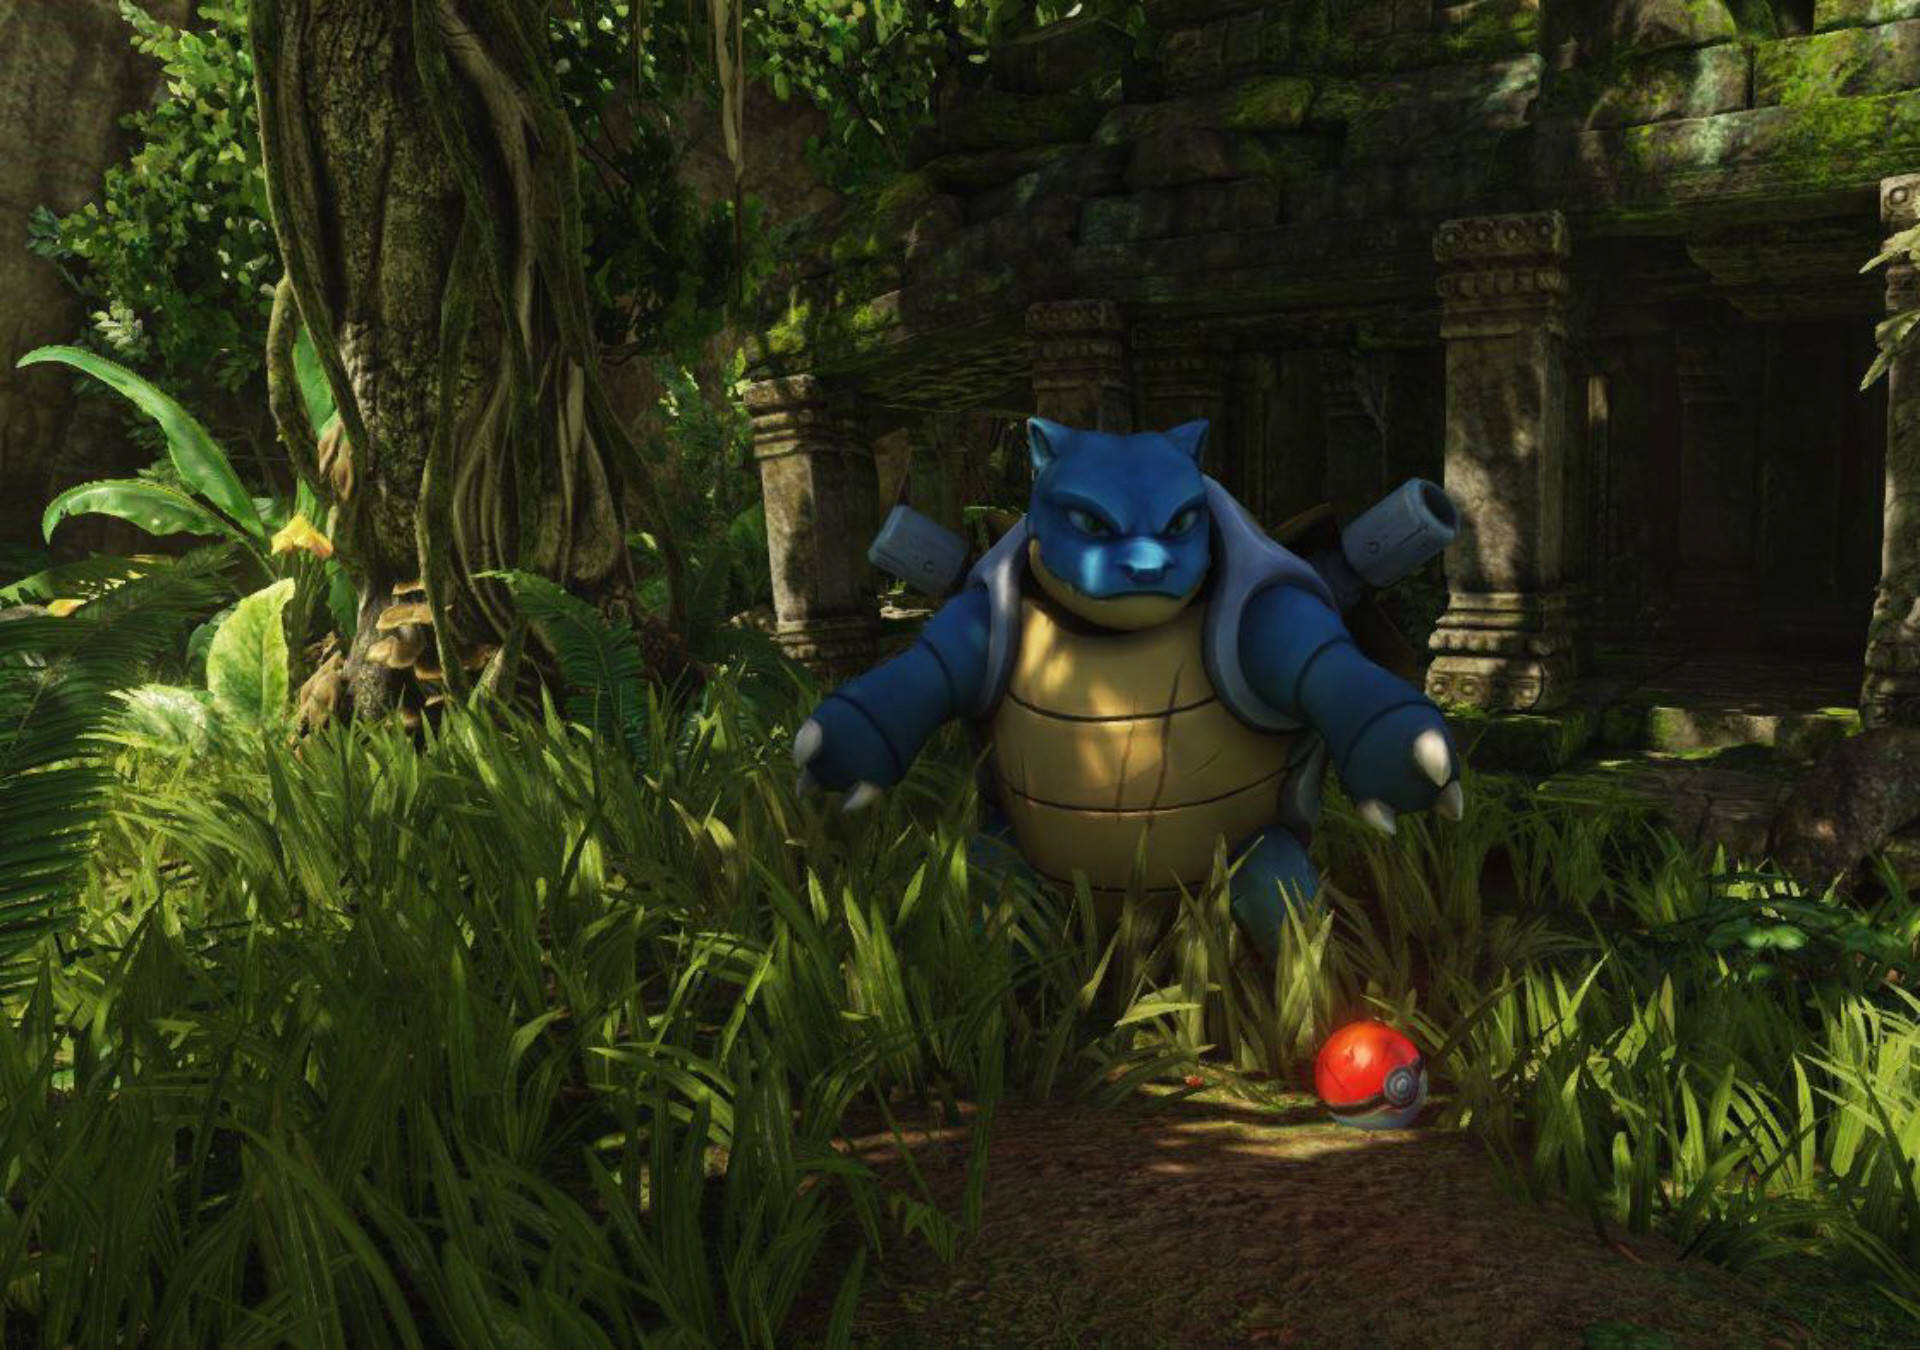 Blastoise, A Powerful And Majestic Pokémon, Proudly Stands In A Lush Jungle.